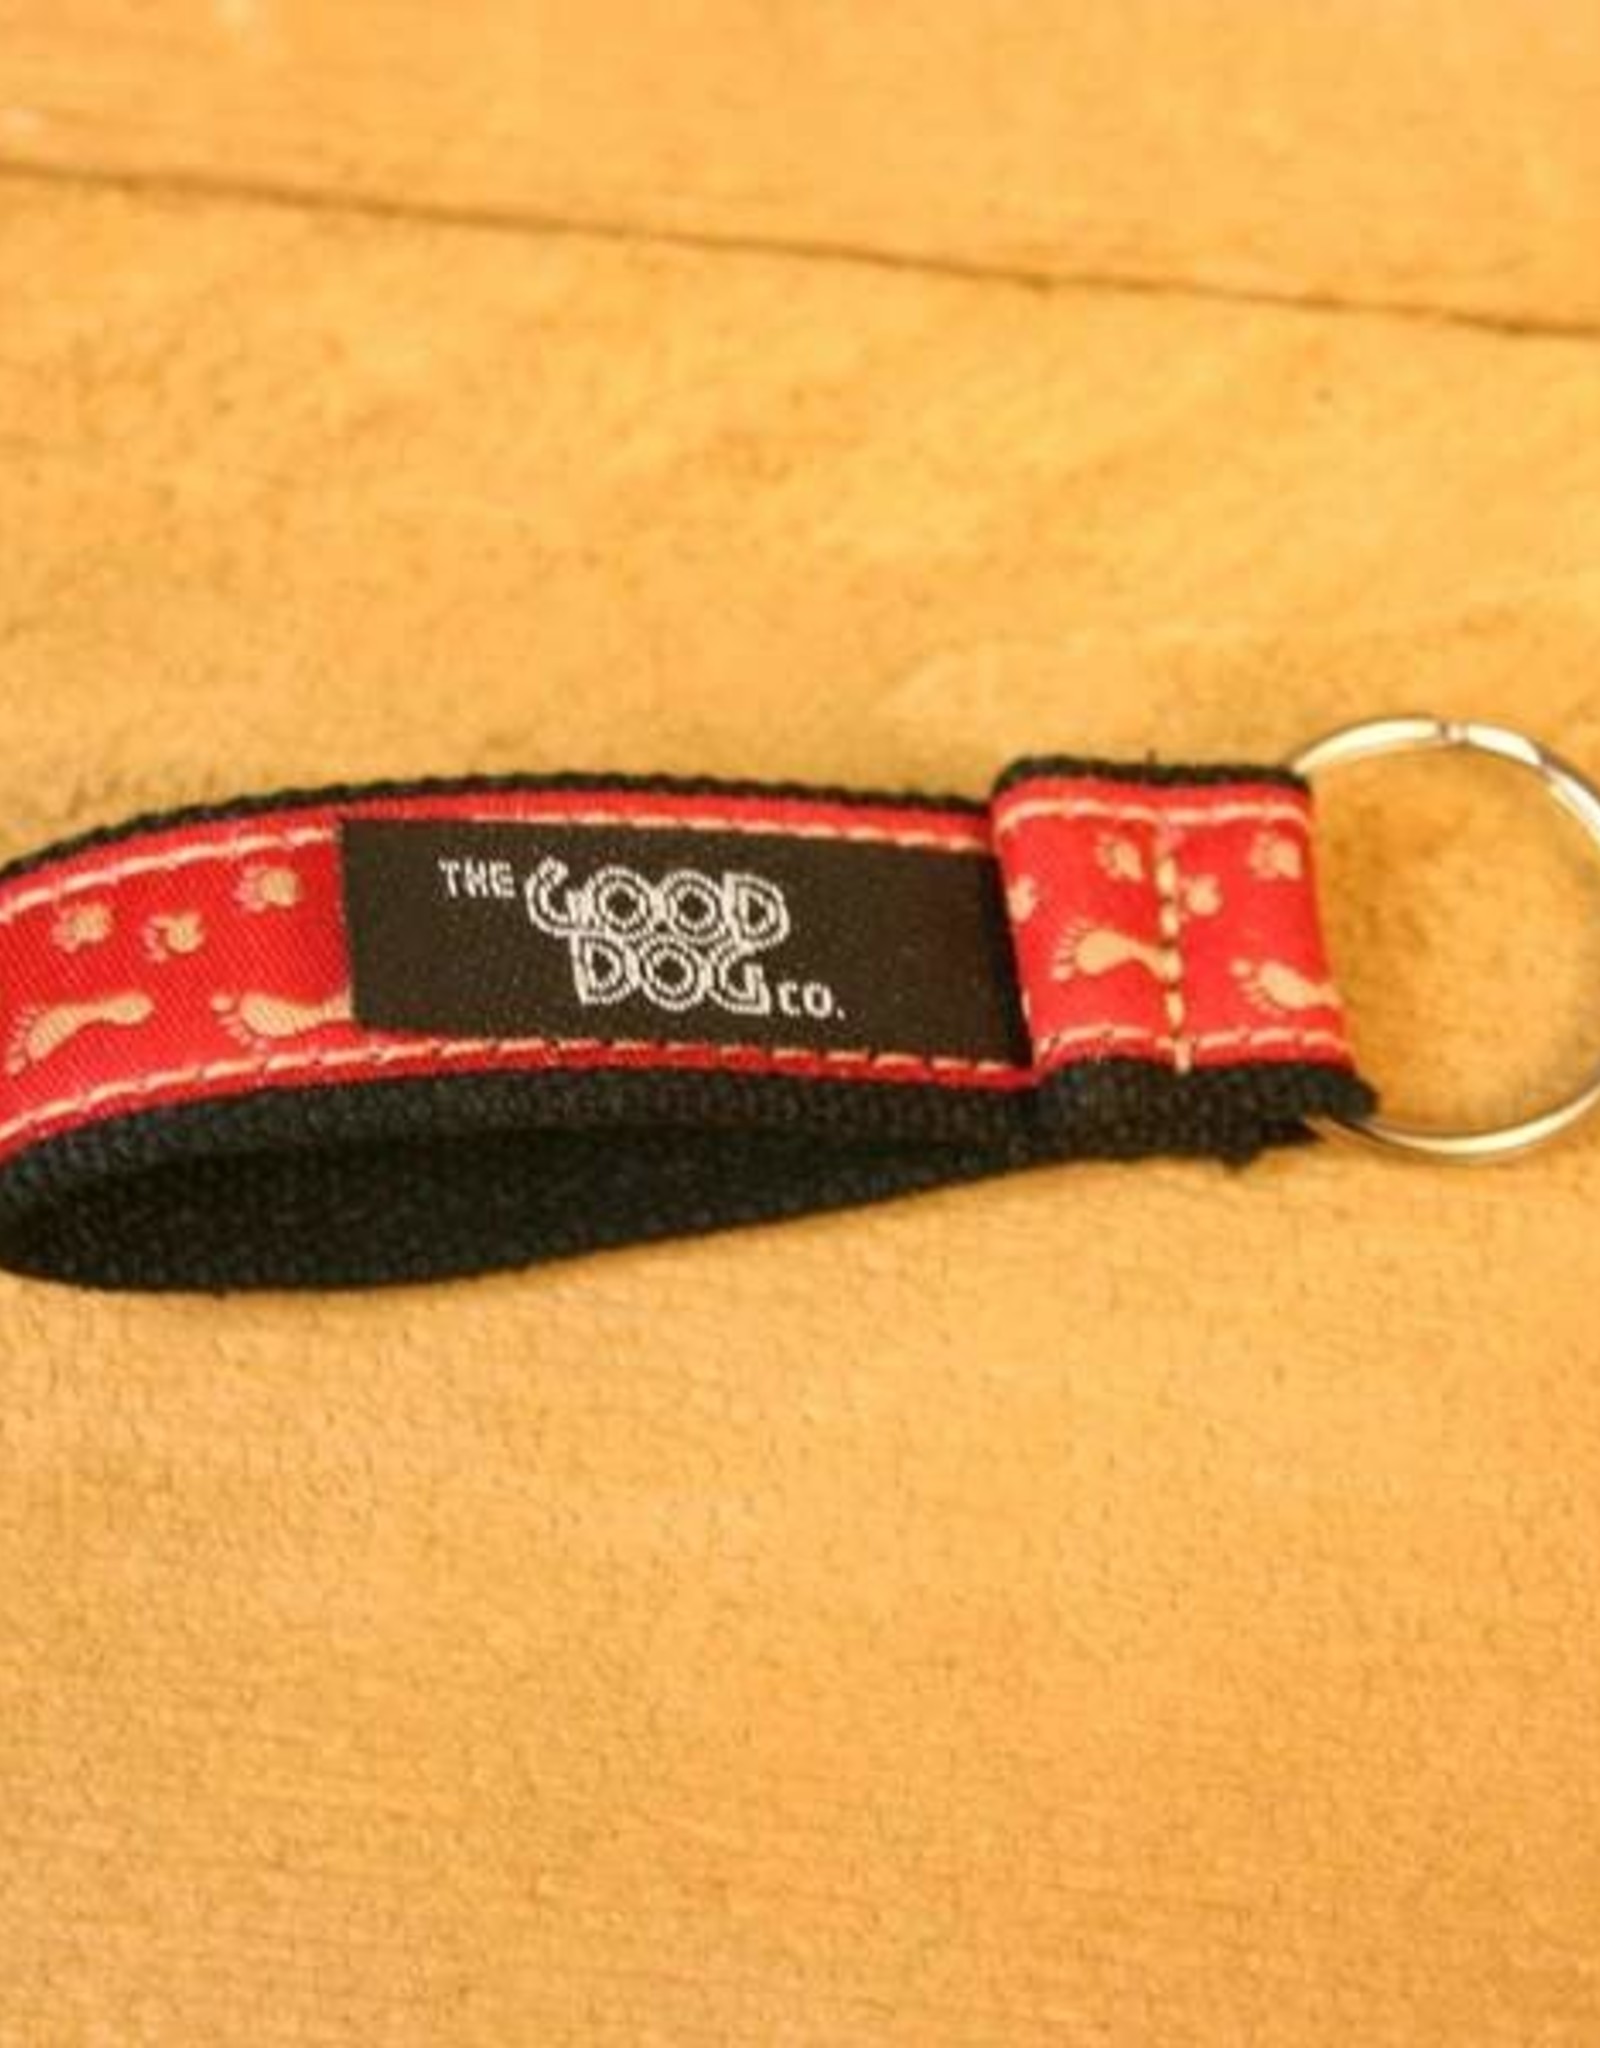 The Good Dog Company Best Friends Keychain Red Paws